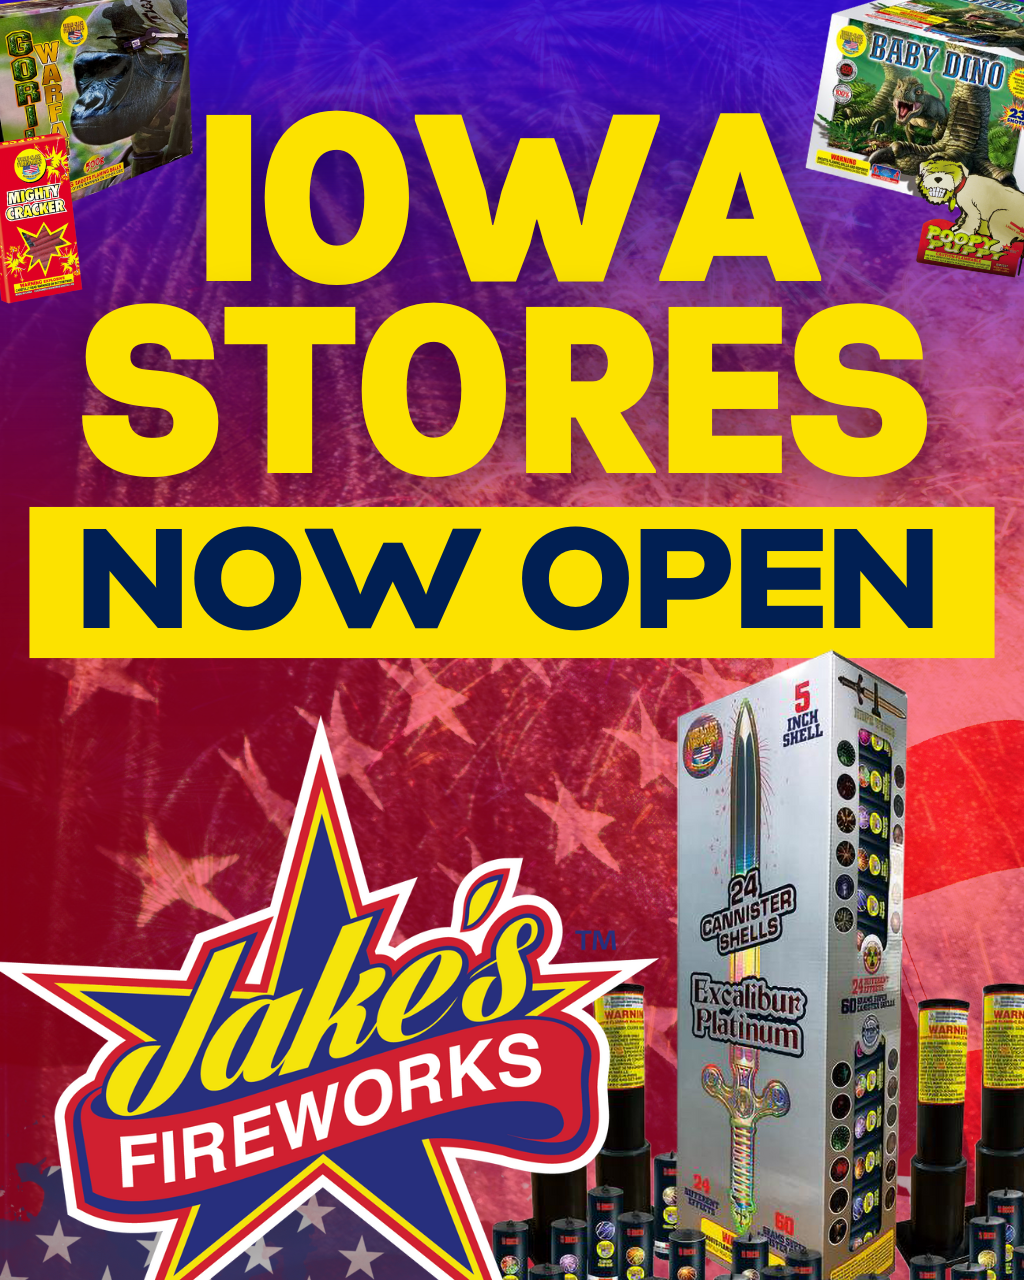 Iowa Stores Now Open - Weekend VIP Coupons